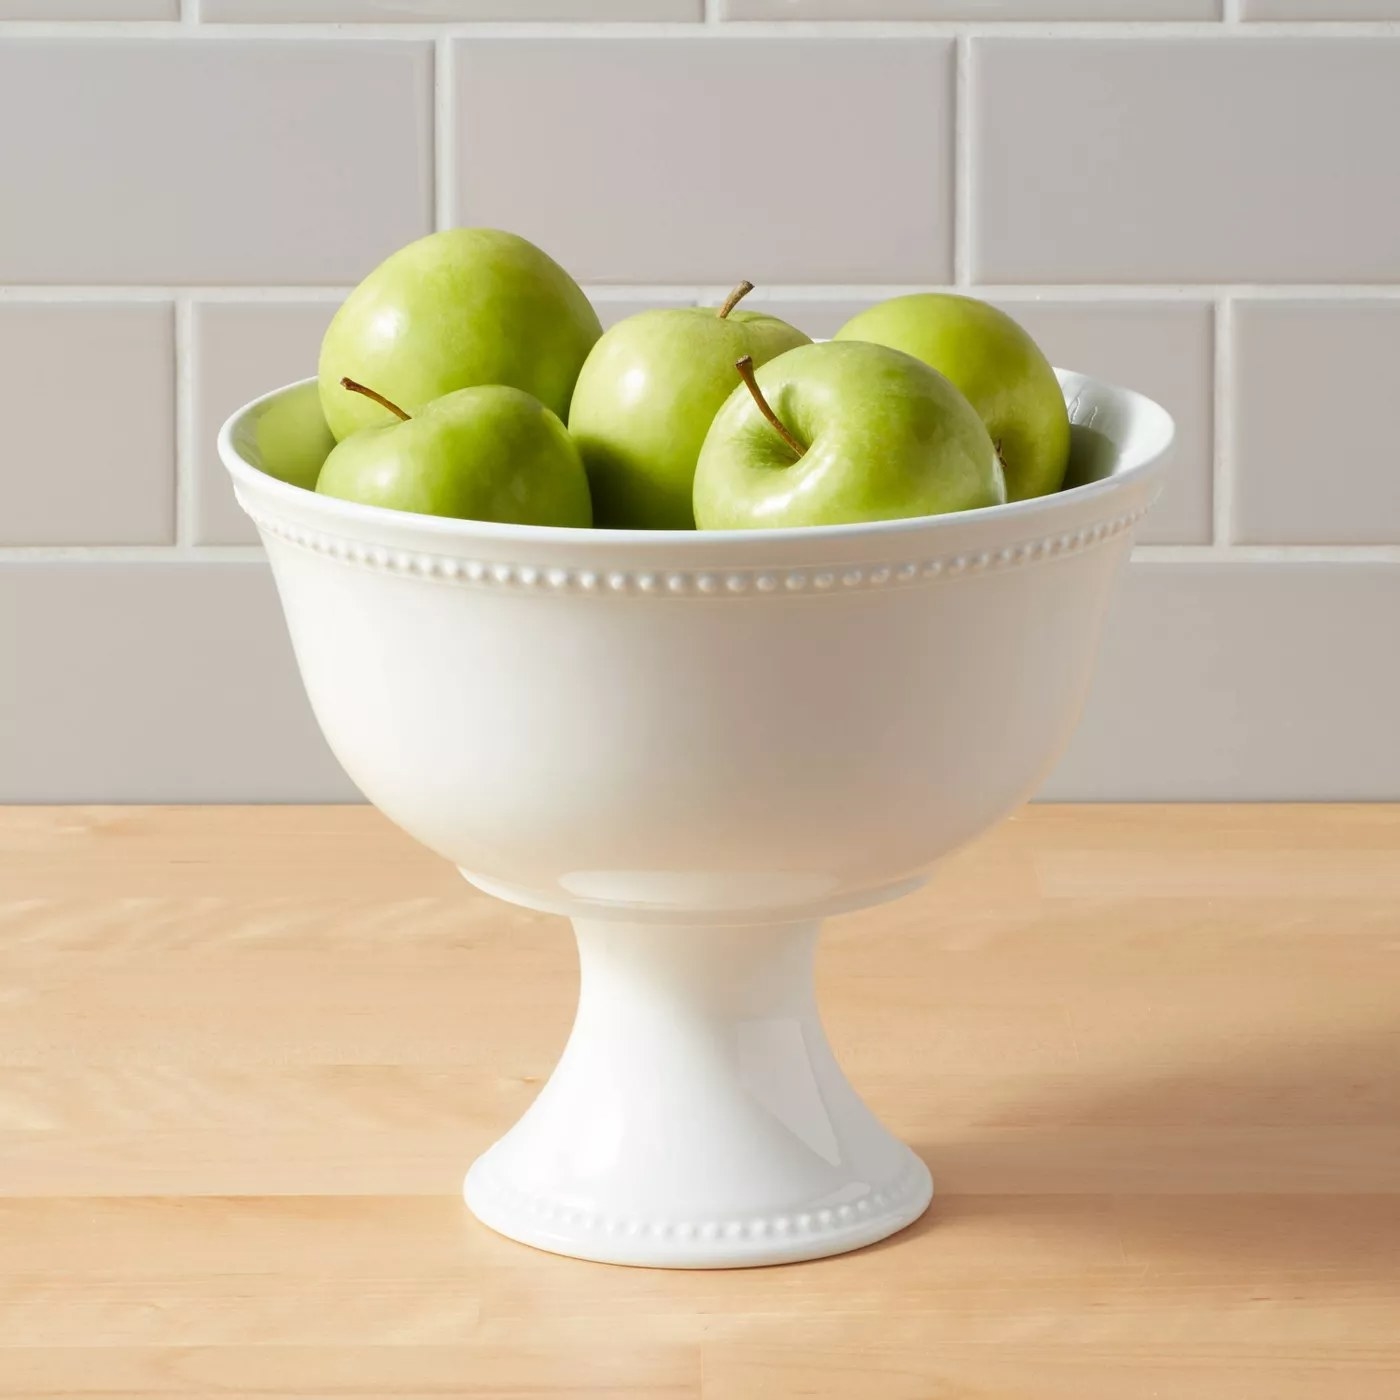 The bowl with apples in it on a kitchen counter